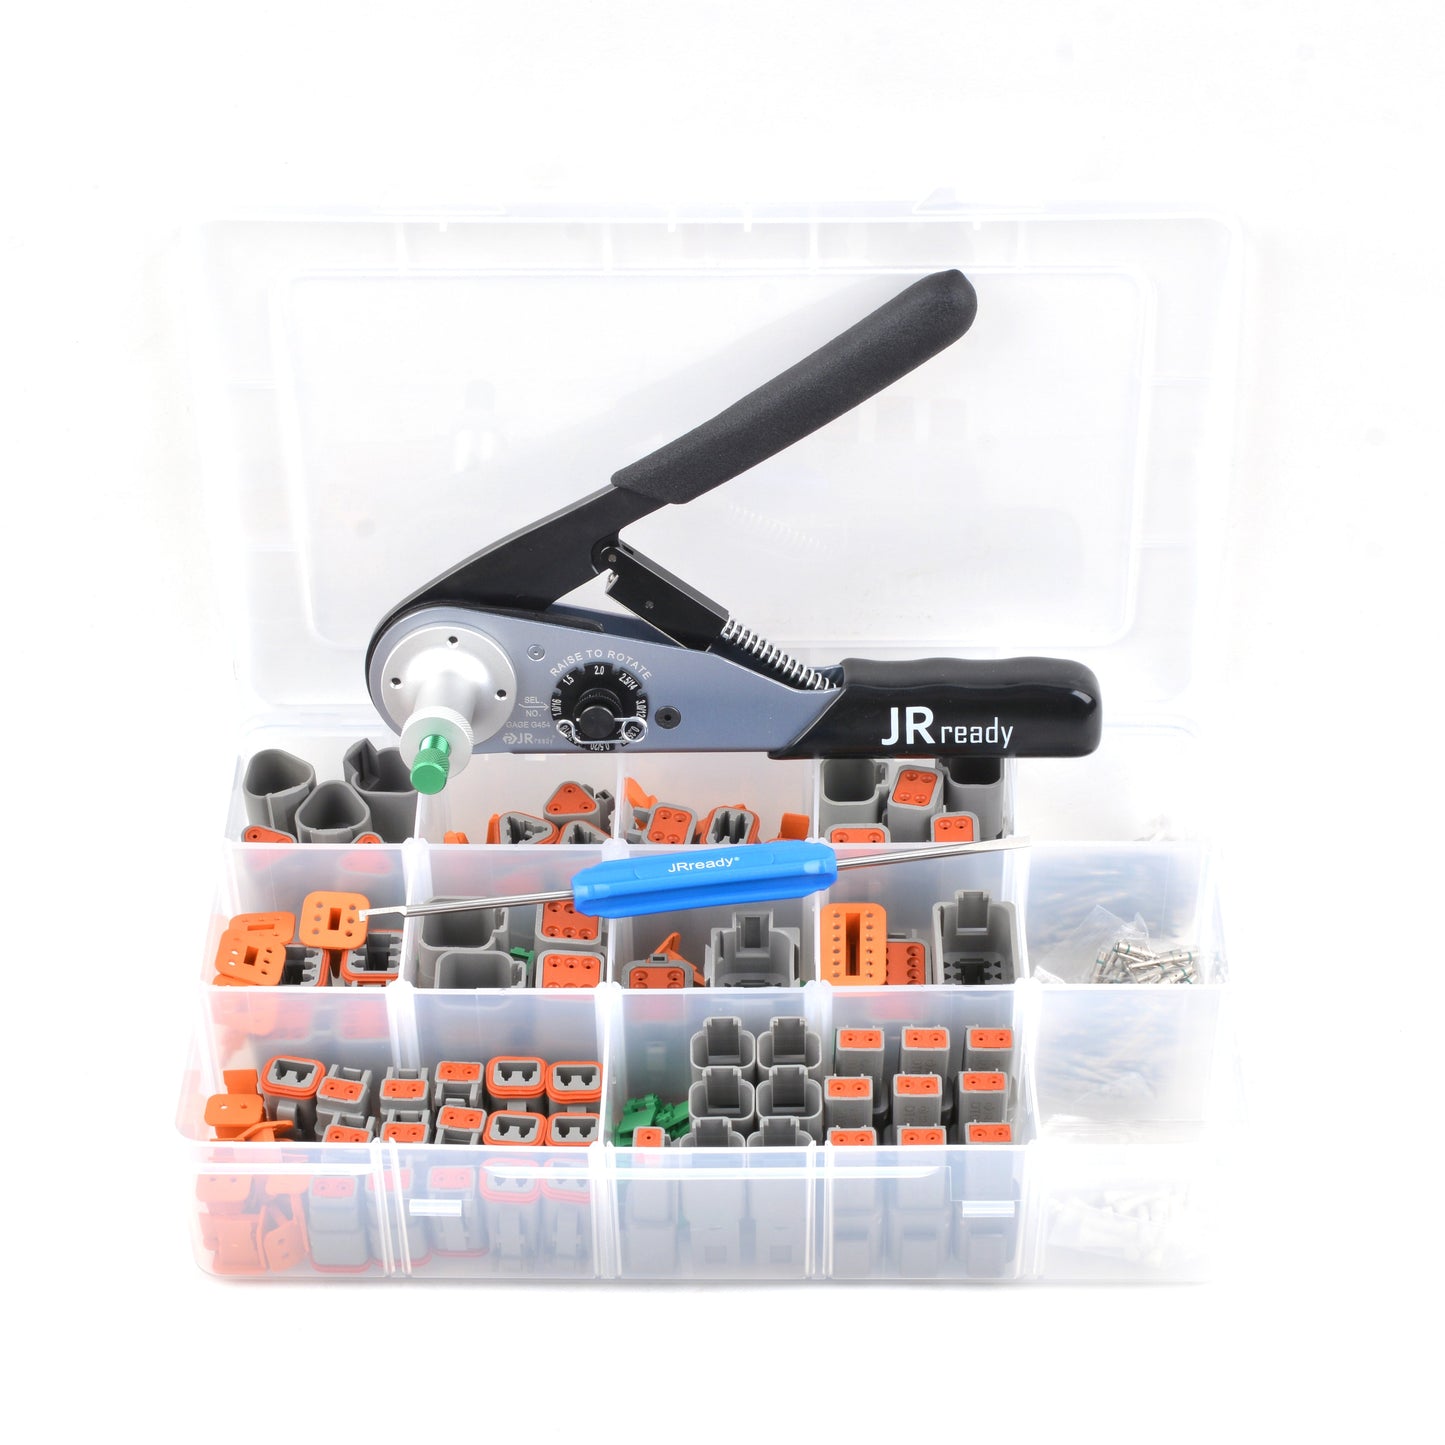 JRready ST6146 DT Connector Kit, 2-12 Pin 368 PCS Connector/Solid Contact/Crimper ACT-M202 for 12-22AWG